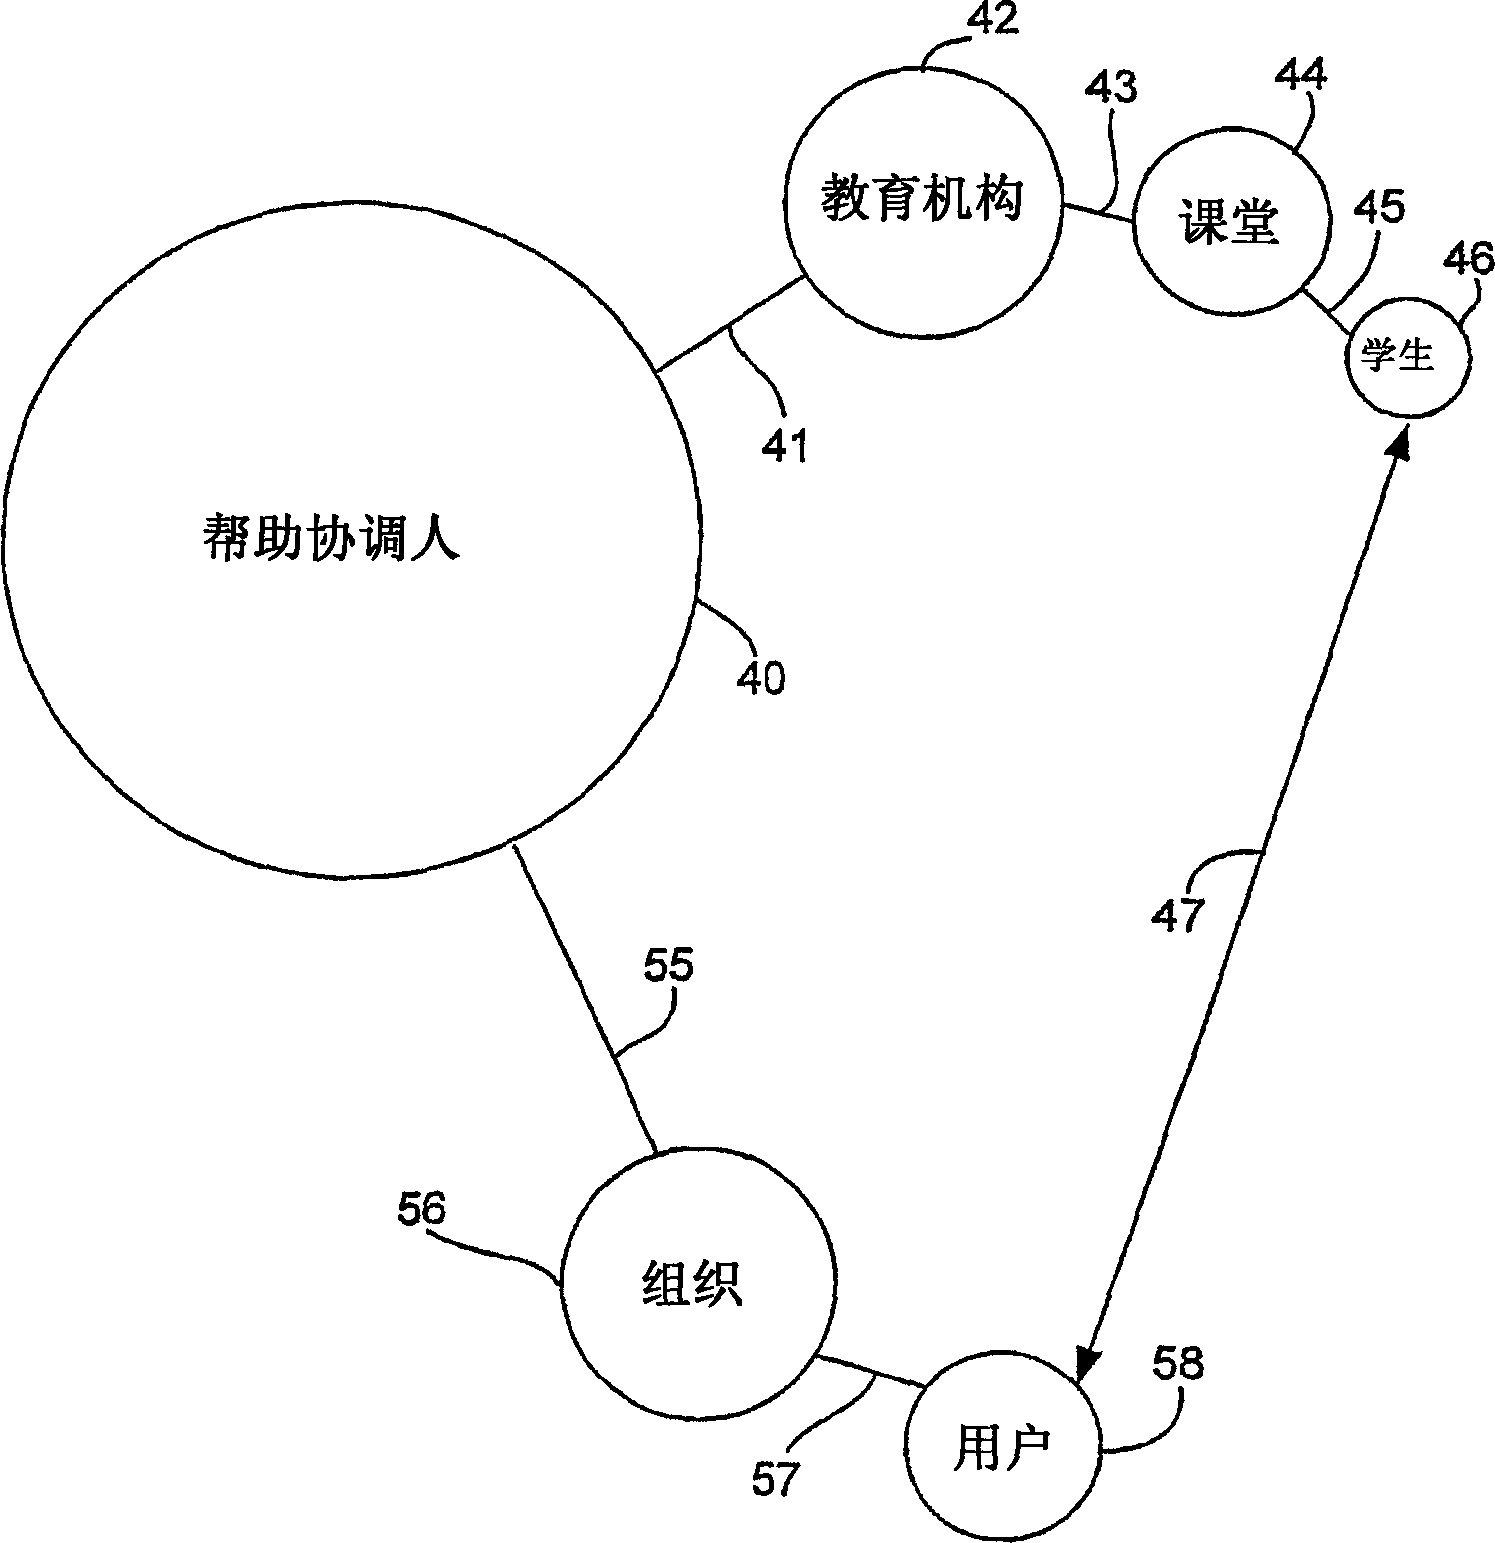 Methods for providing technical support in network